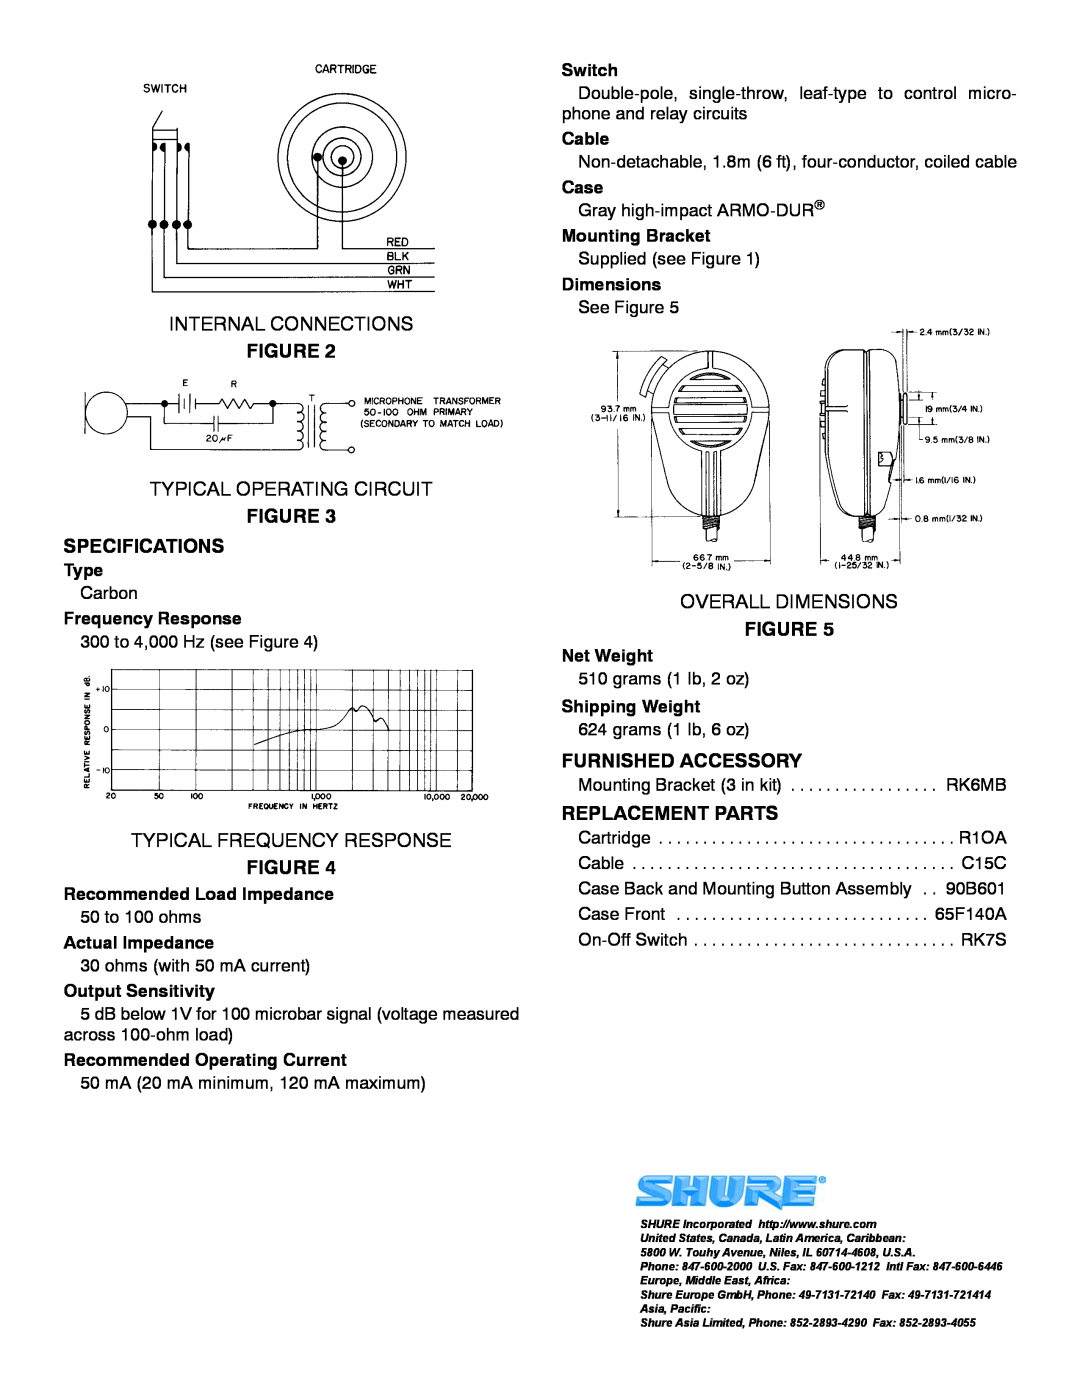 Shure 104C Internal Connections, Typical Operating Circuit, Specifications, Typical Frequency Response, Overall Dimensions 